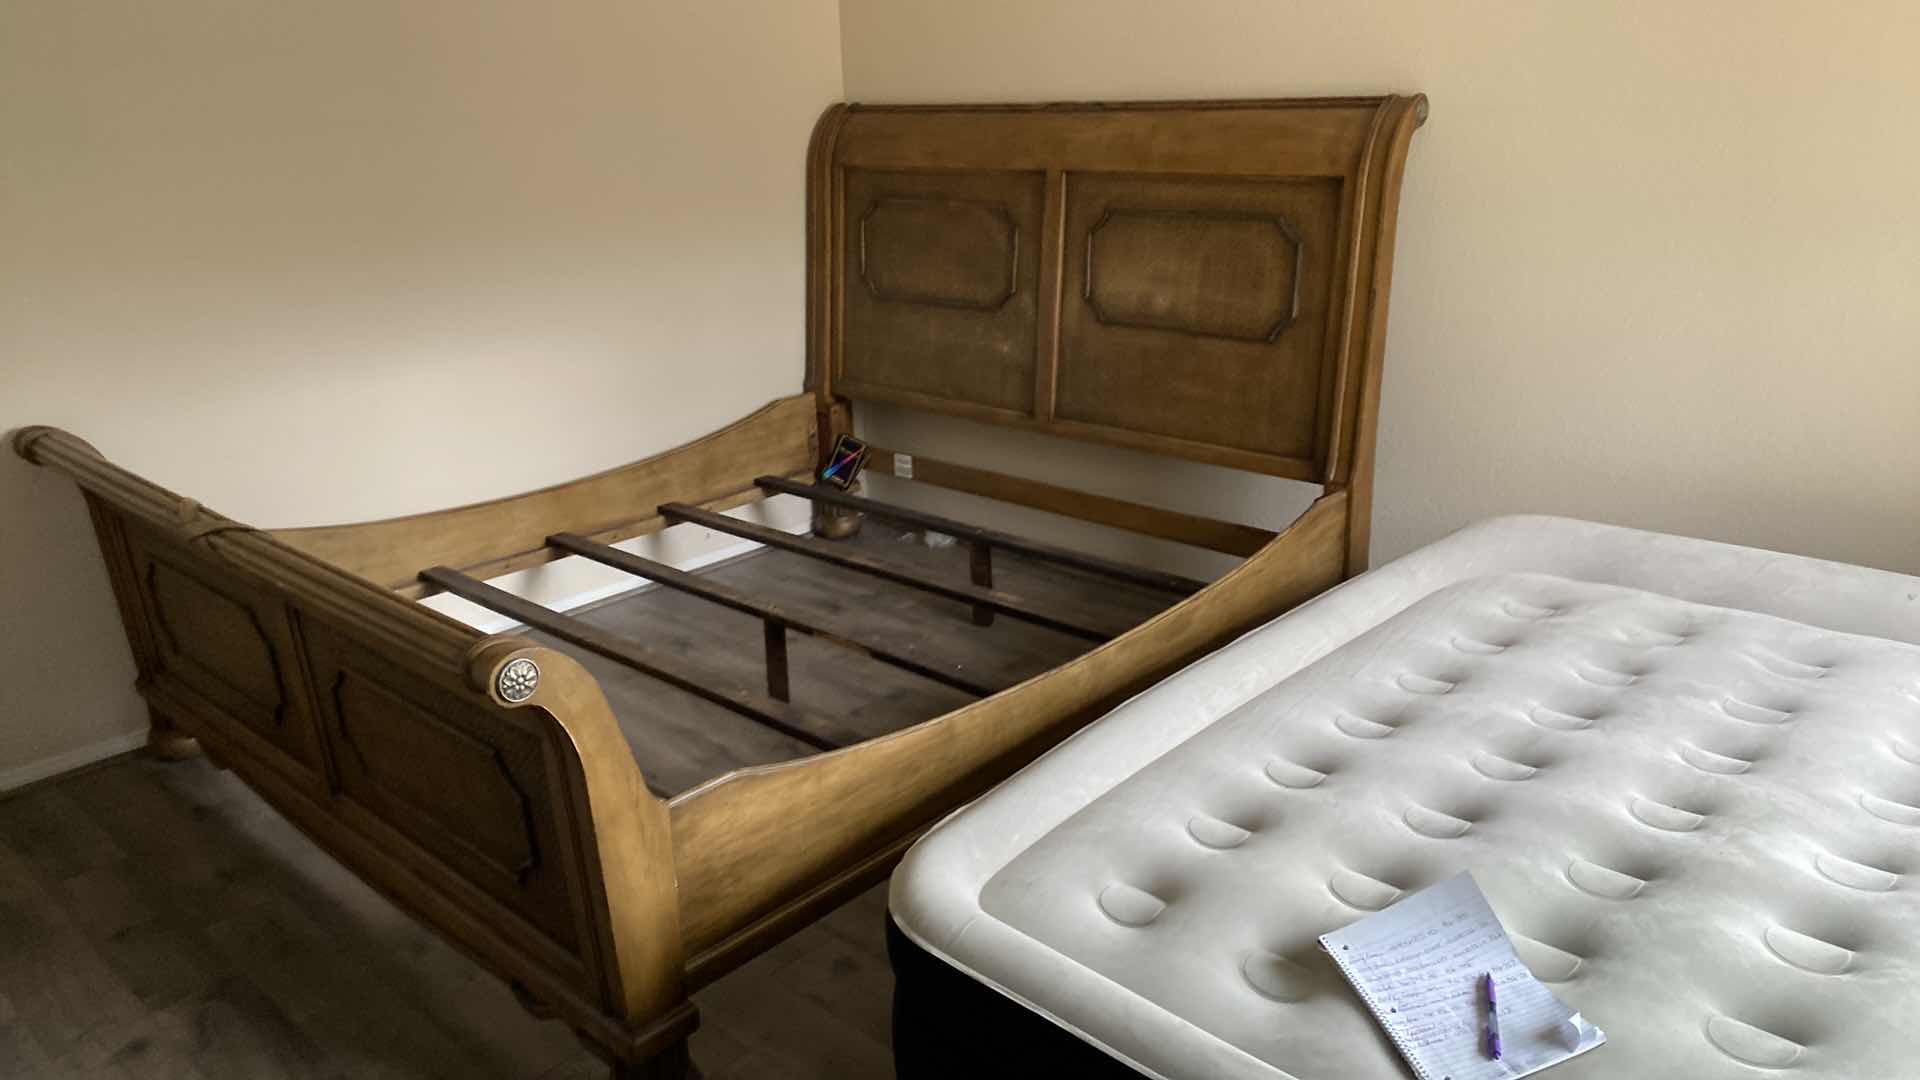 Photo 2 of MILLENNIUM BY ASHLEY KING SLEIGH BED 79“ x 94“ H 58” INCLUDES KING KOIL AIR BED SIZE UNKNOWN